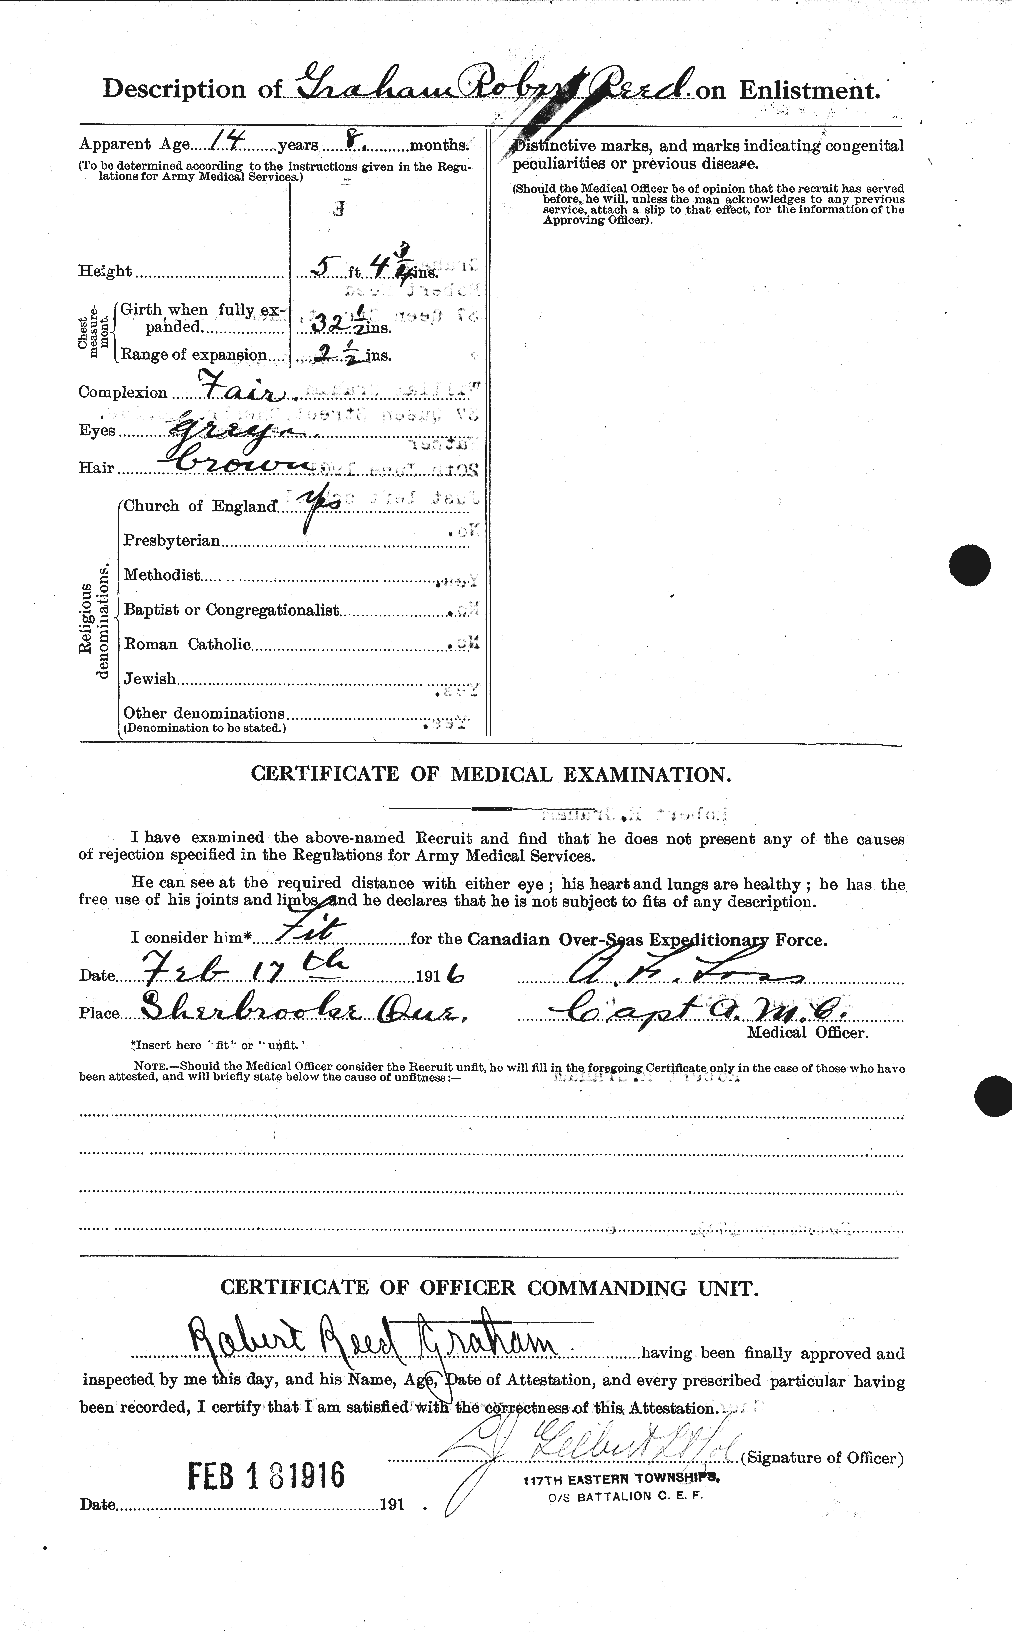 Personnel Records of the First World War - CEF 359420b